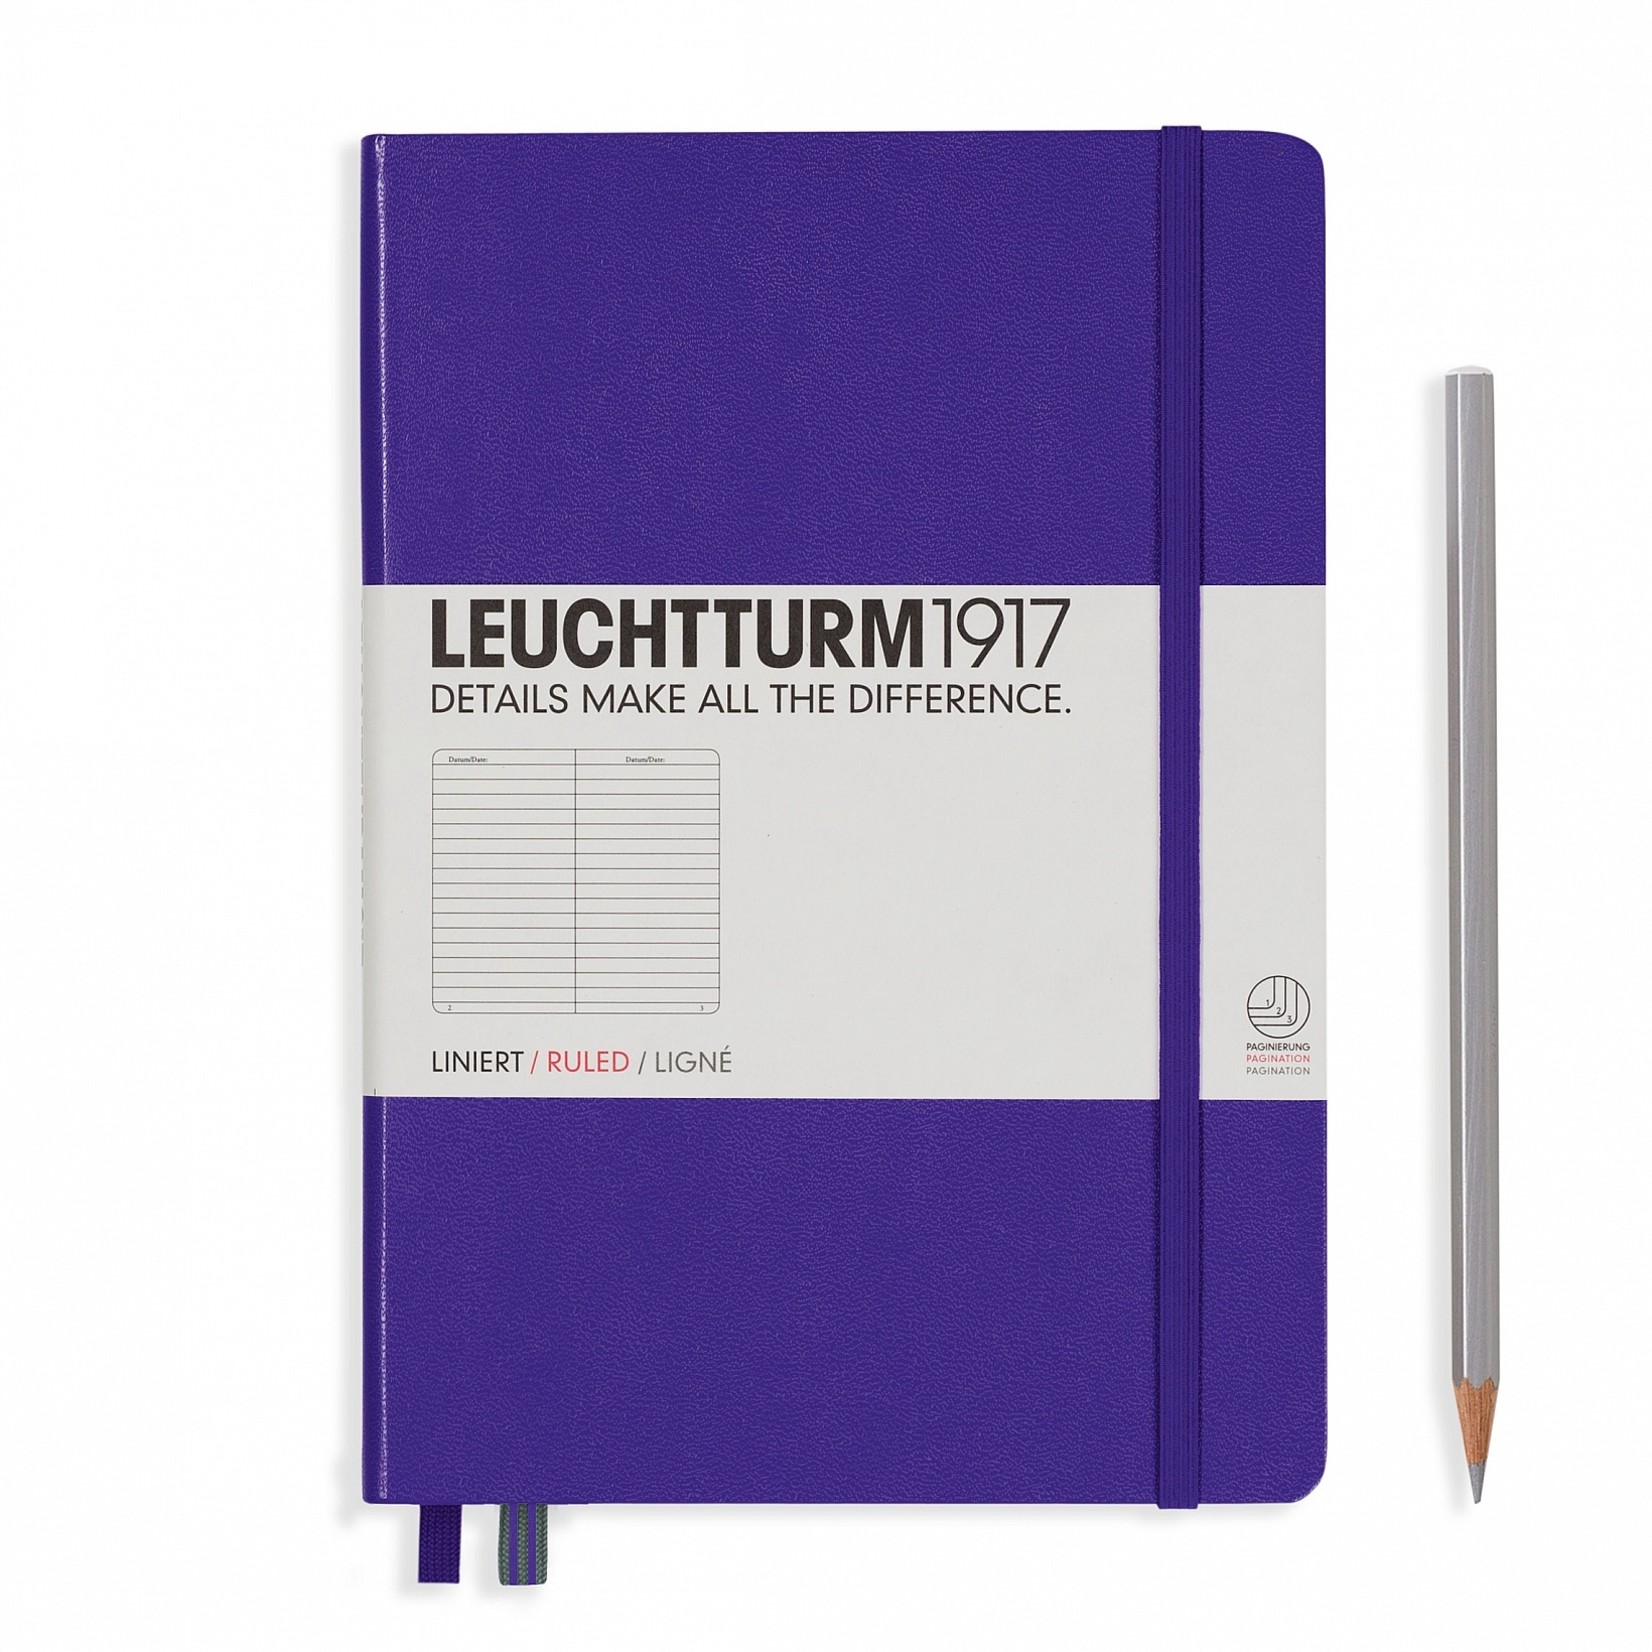 LEUCHTTURM1917 Notebook Hardcover Medium (A5) - 251 pages-Purple/Ruled